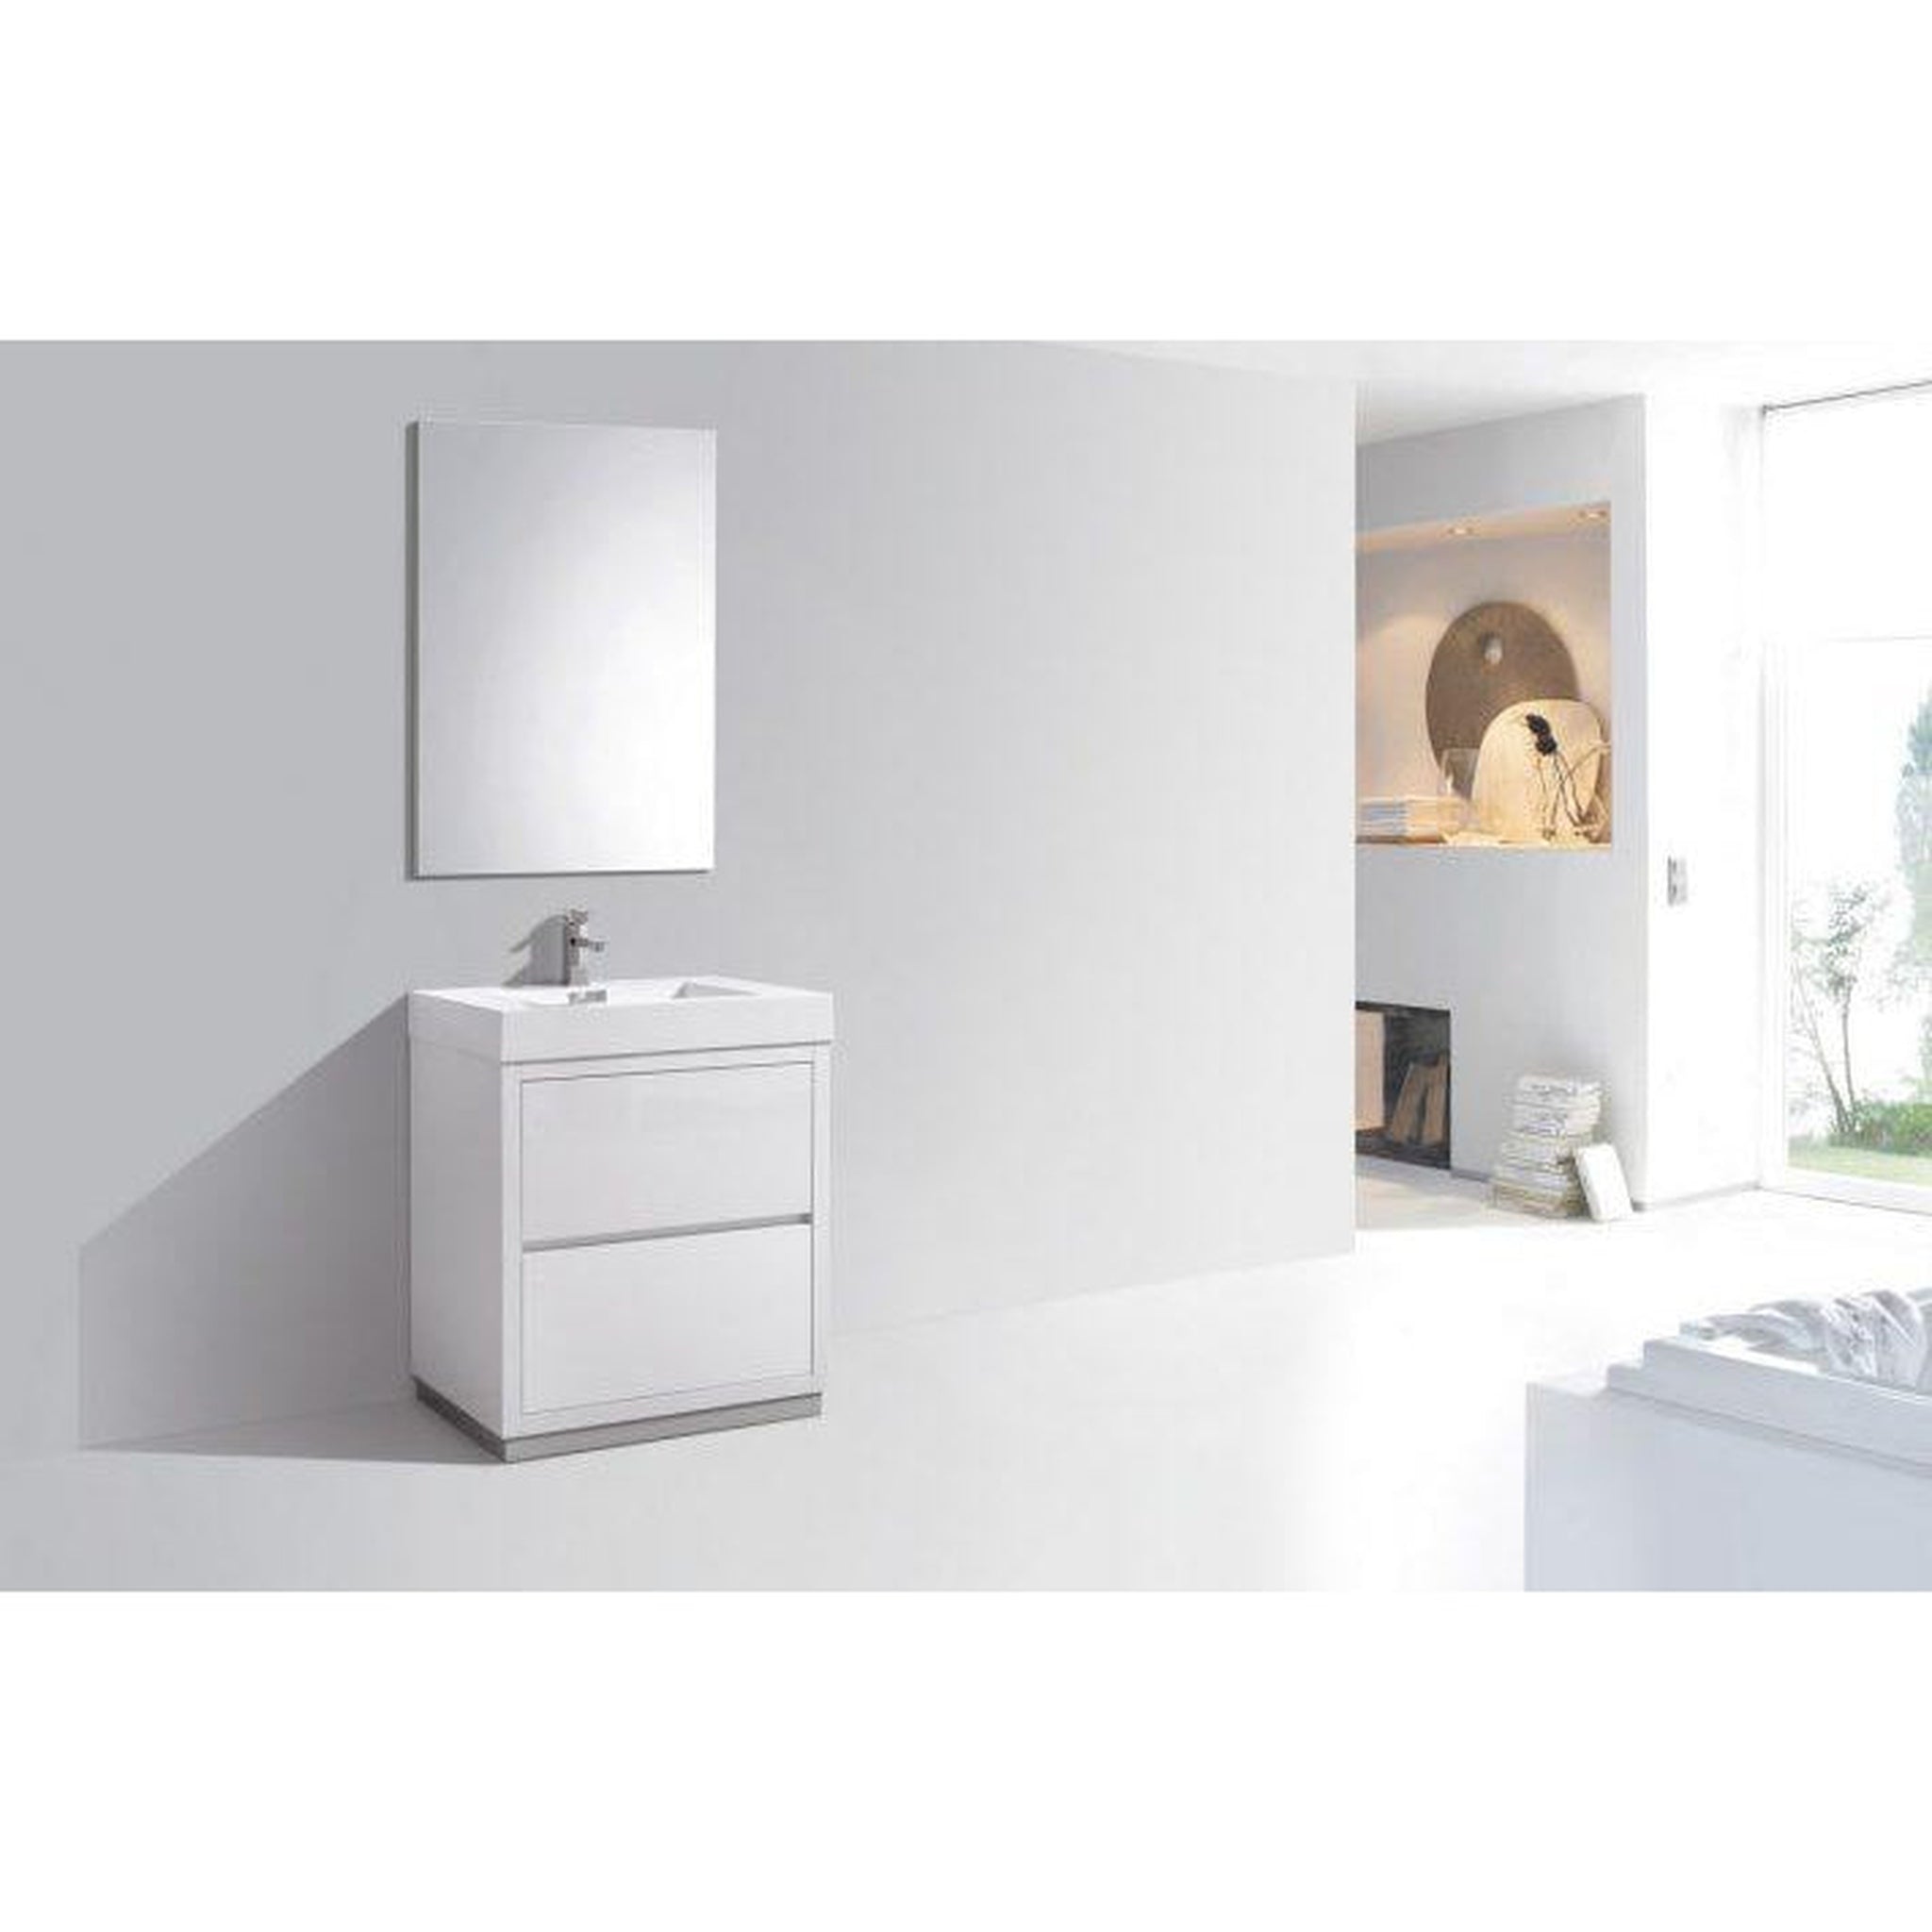 KubeBath, KubeBath Bliss 30" High Gloss White Freestanding Modern Bathroom Vanity With Single Integrated Acrylic Sink With Overflow and 30" White Framed Mirror With Shelf